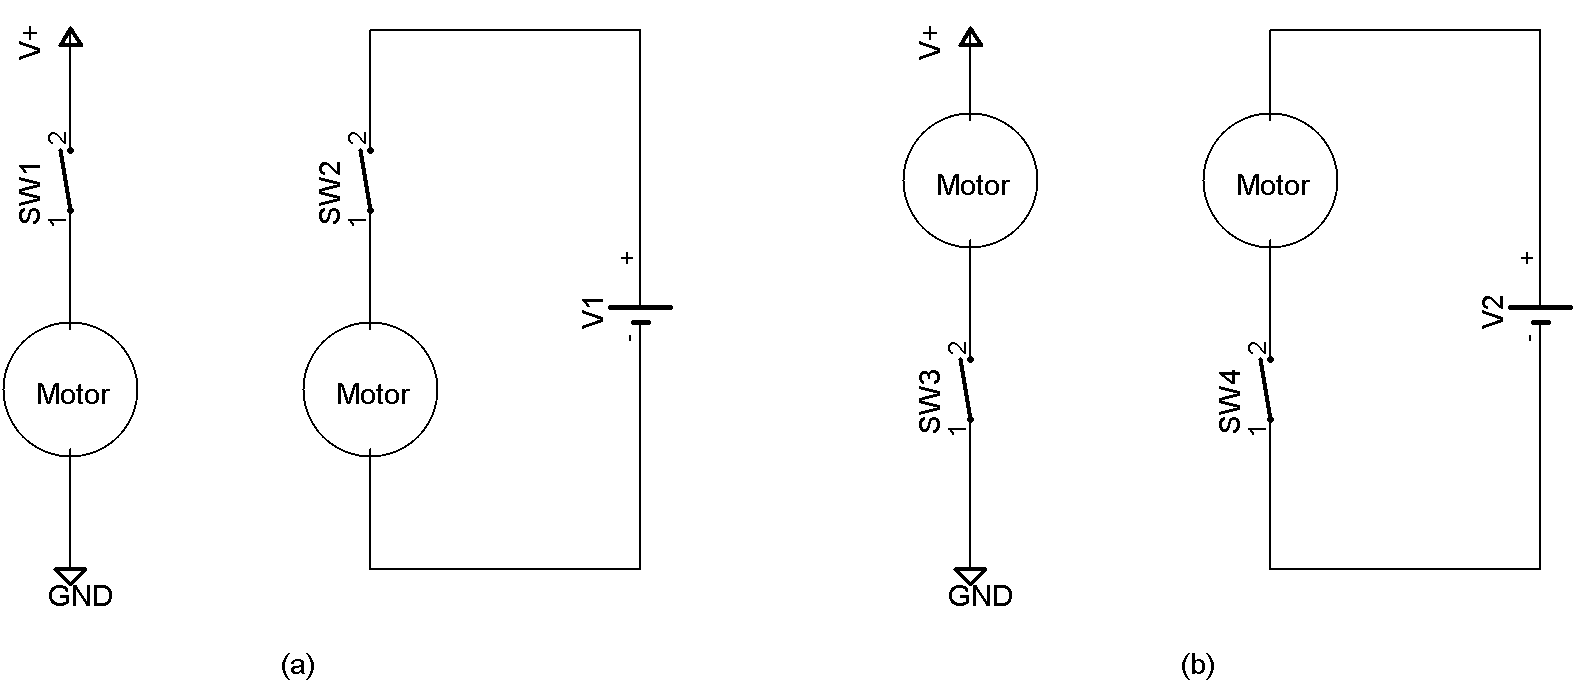 motor control with switch